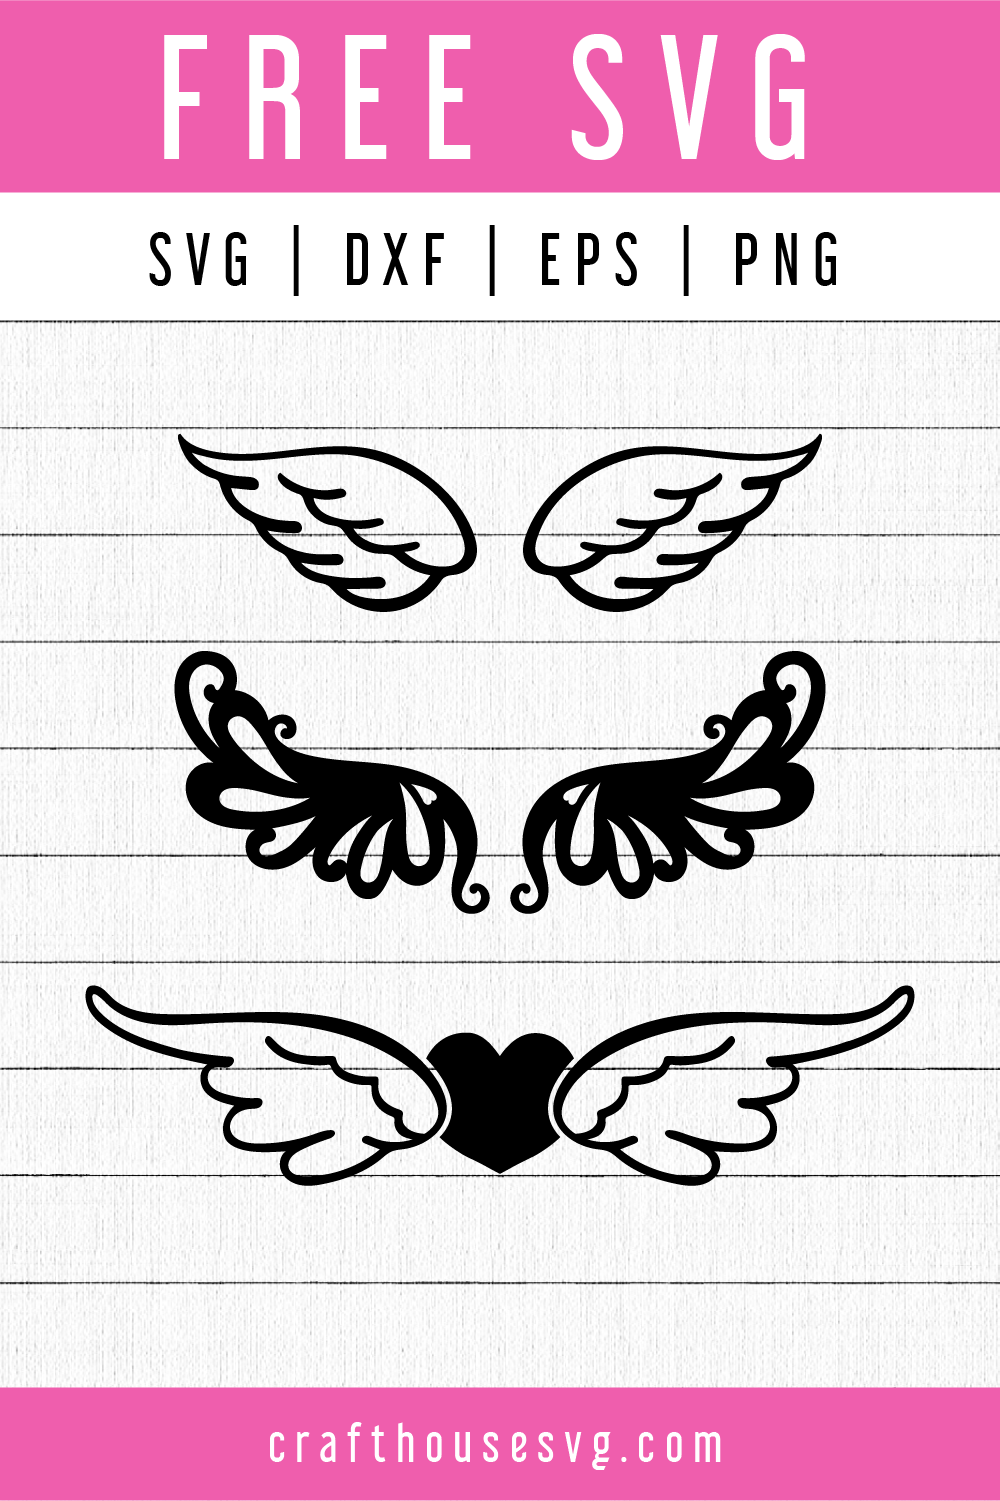 Download Art Collectibles Clip Art Angel Wings Svg Wings Svg Angel Svg Svg Files For Silhouette